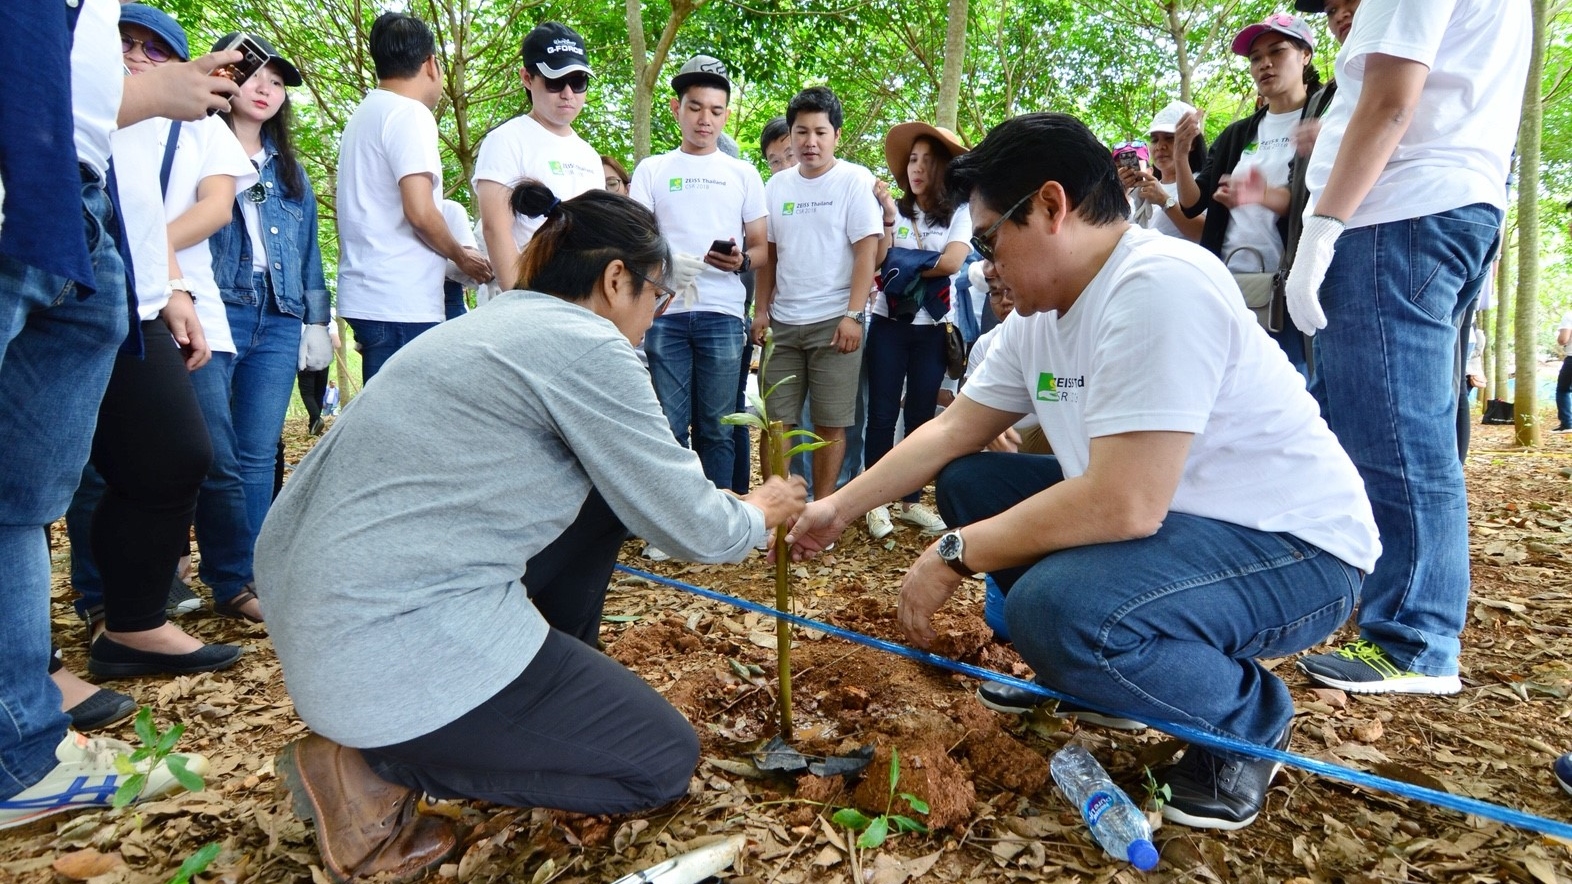 ZEISS colleagues planting a tree in Thailand’s third largest national park, Khao Yai